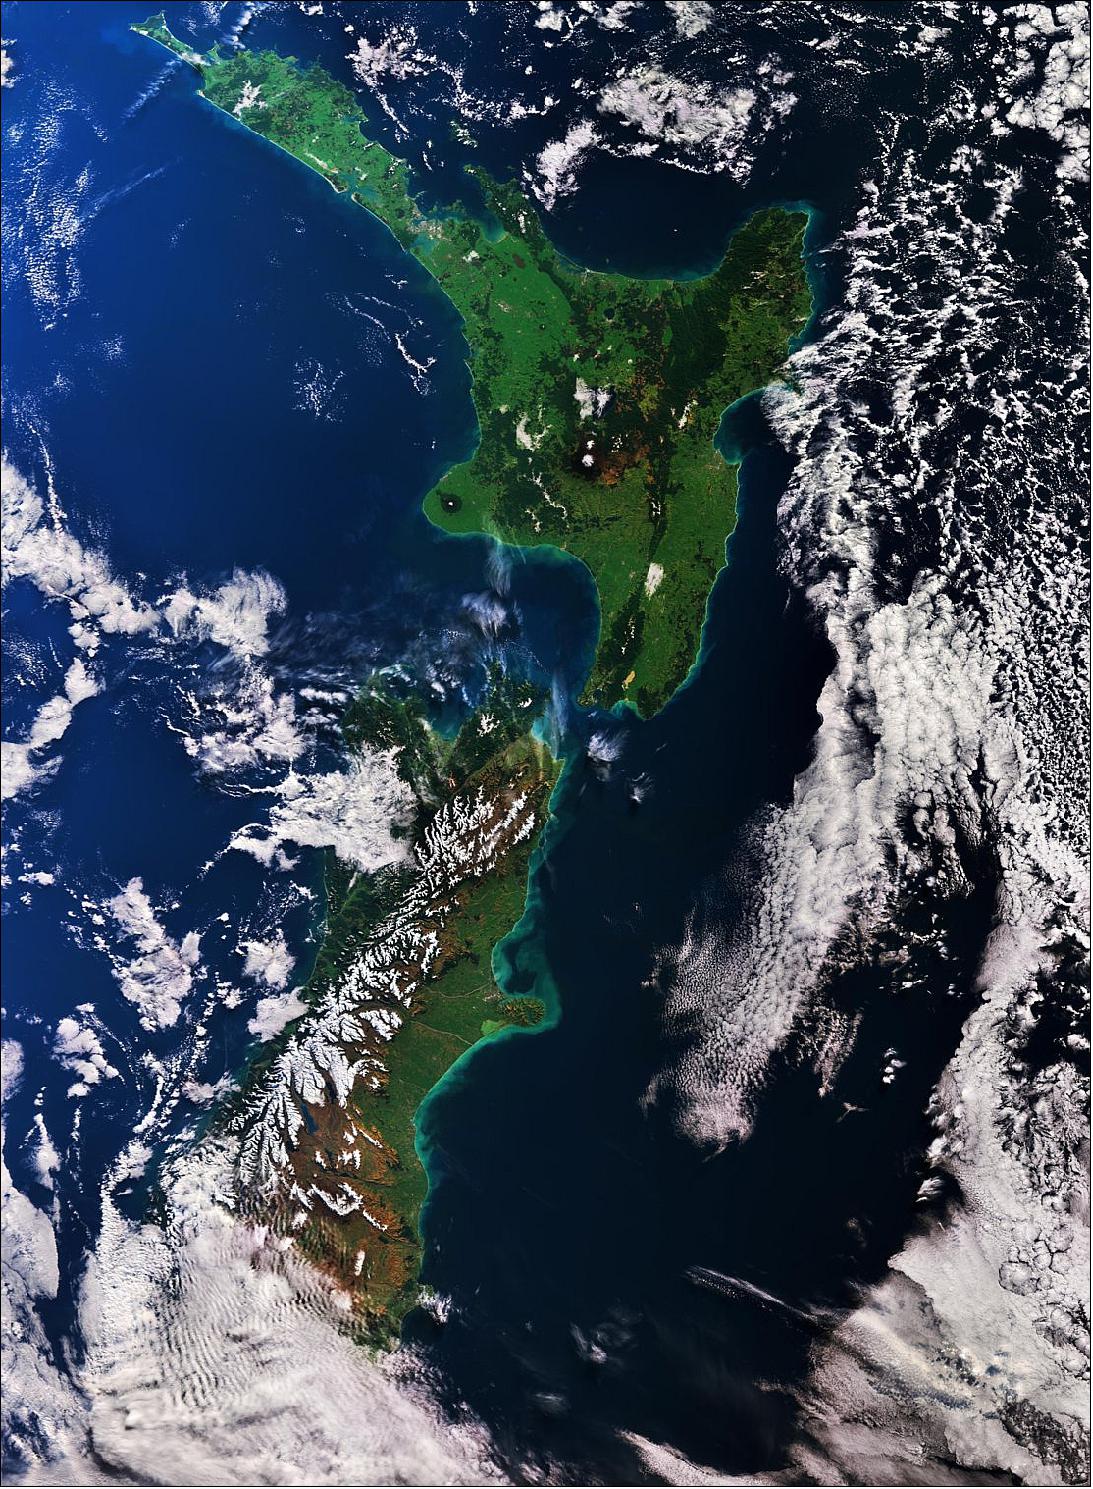 Figure 19: This true color image of New Zealand, captured on 22 August 2018 with Sentinel-3A, shows the snow-covered Southern Alps stretching 500 km across the west coast of the South Island. This image is also featured on the Earth from Space video program (image credit: ESA, the image contains modified Copernicus Sentinel data (2018), processed by ESA, CC BY-SA 3.0 IGO)